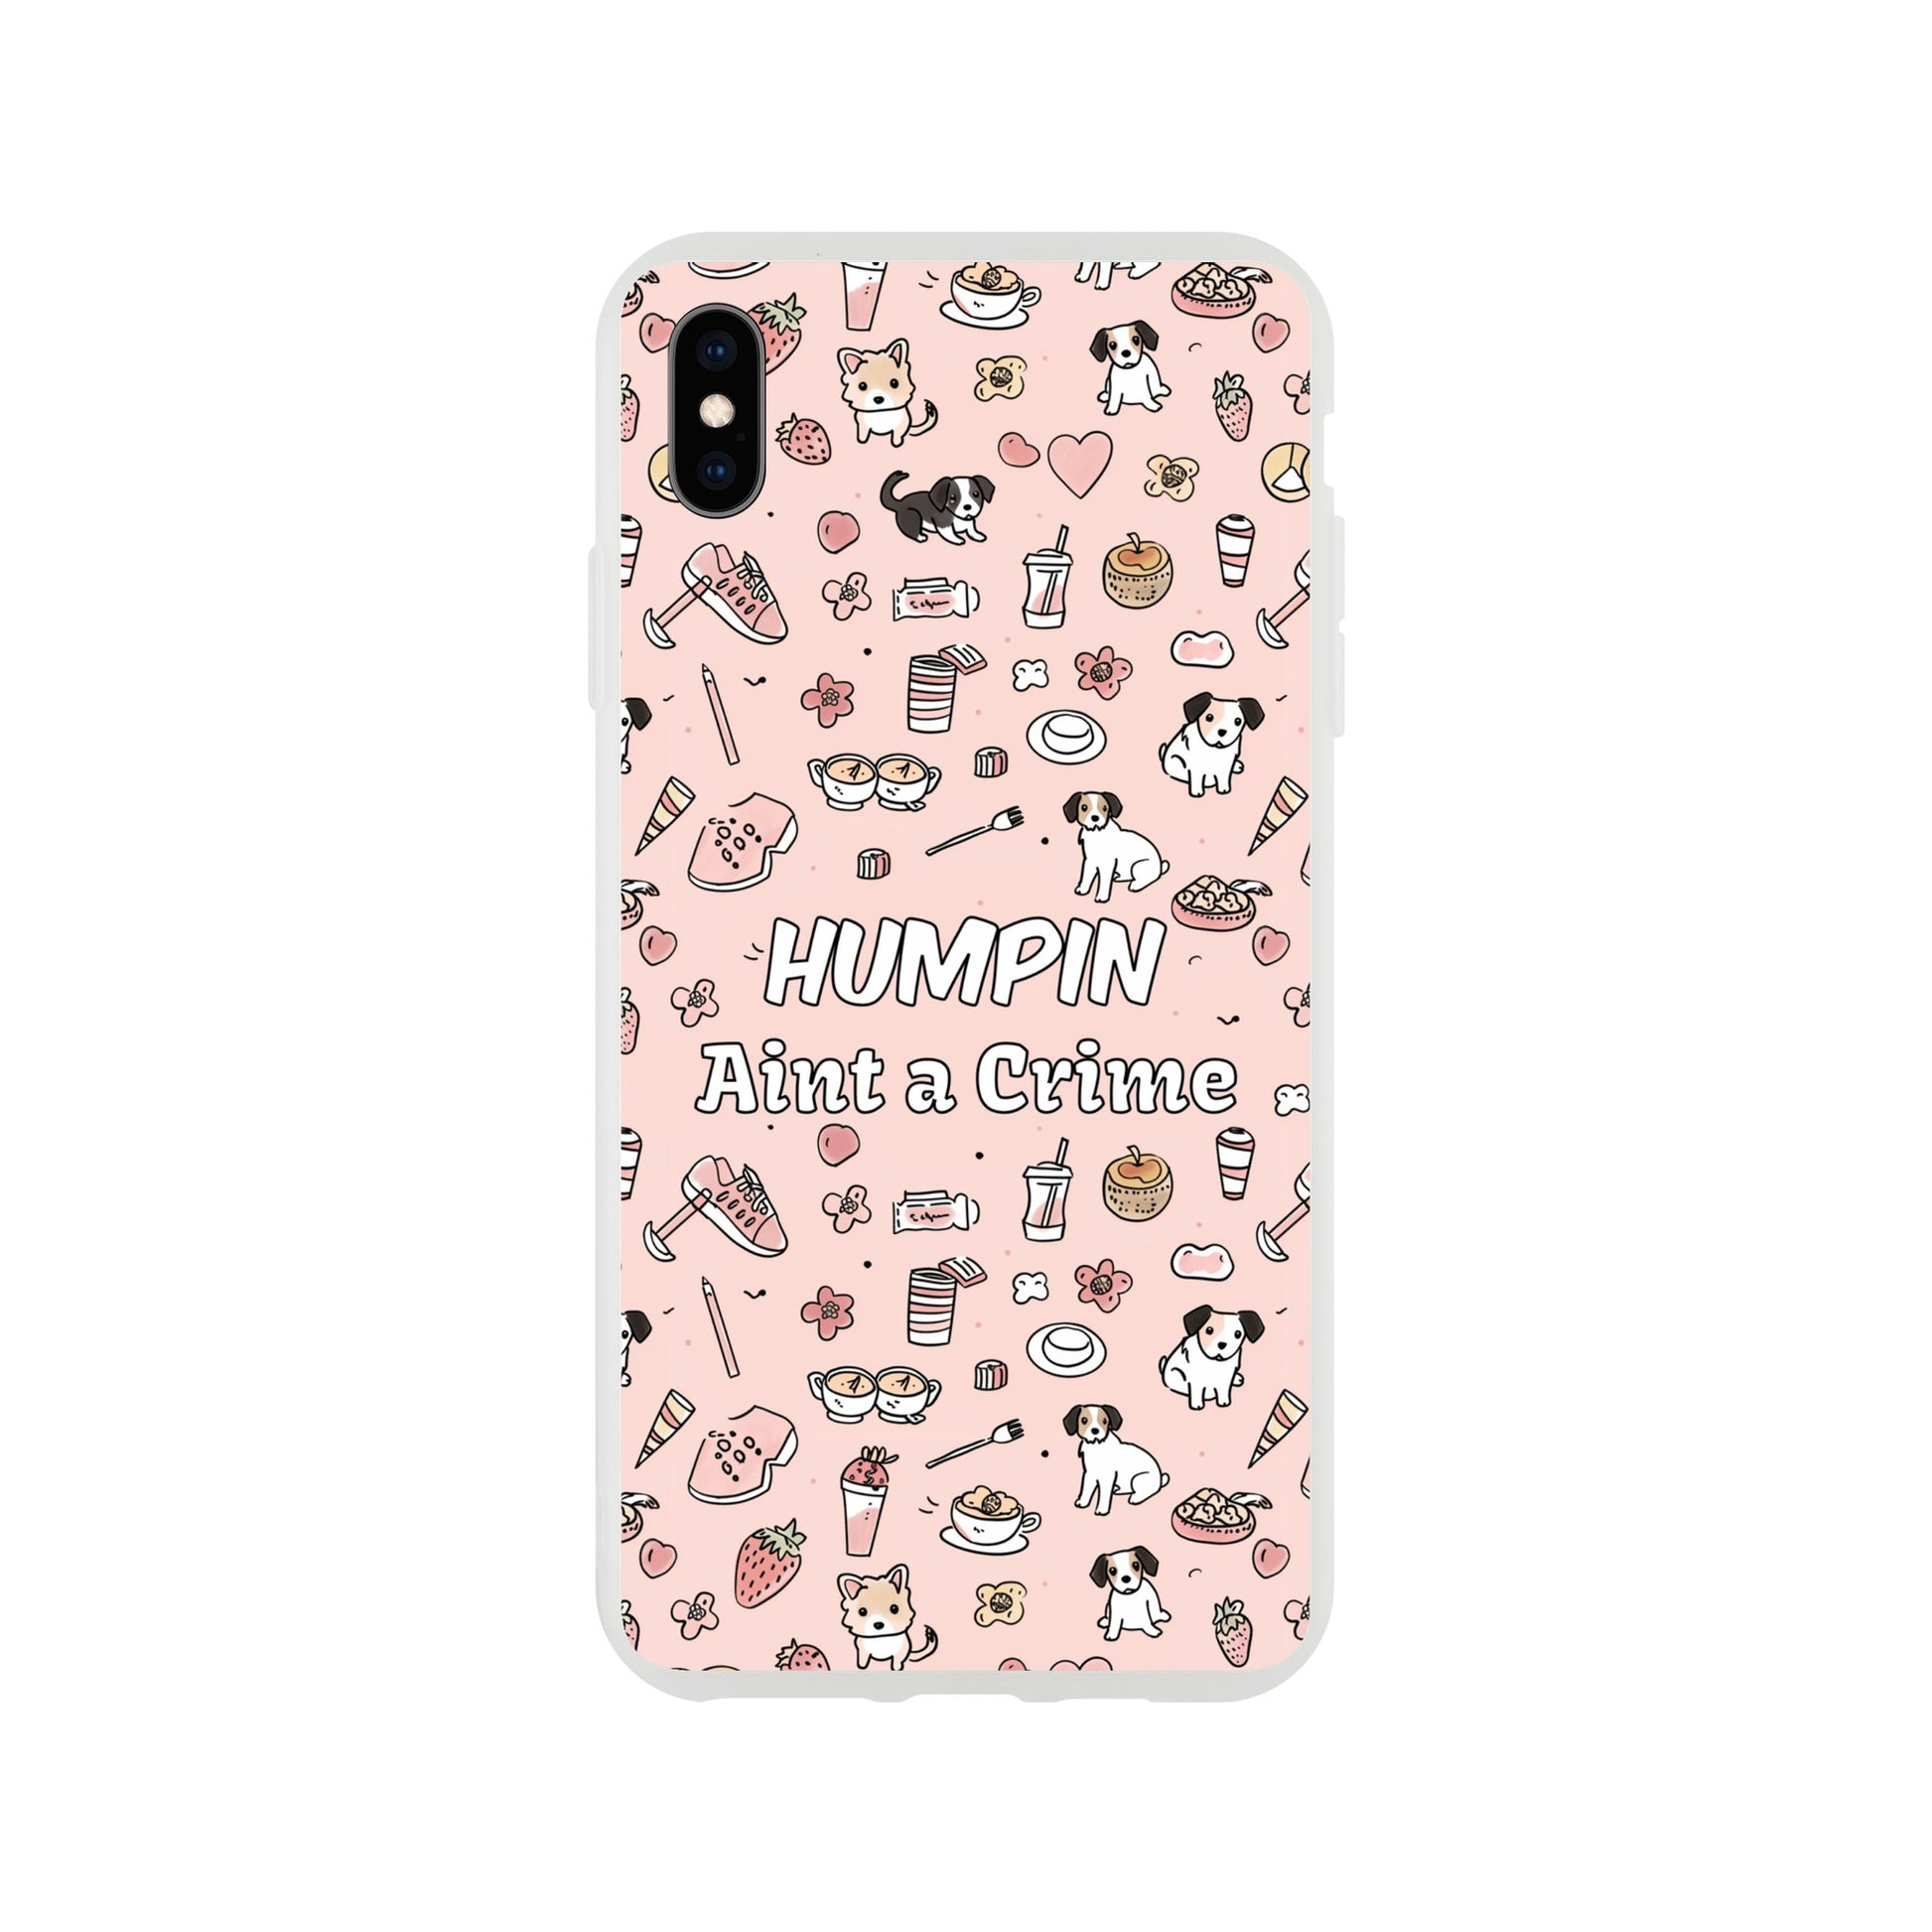 Humpin Aint a Crime - Frosty transparent soft case - Bananas ´n Peaches